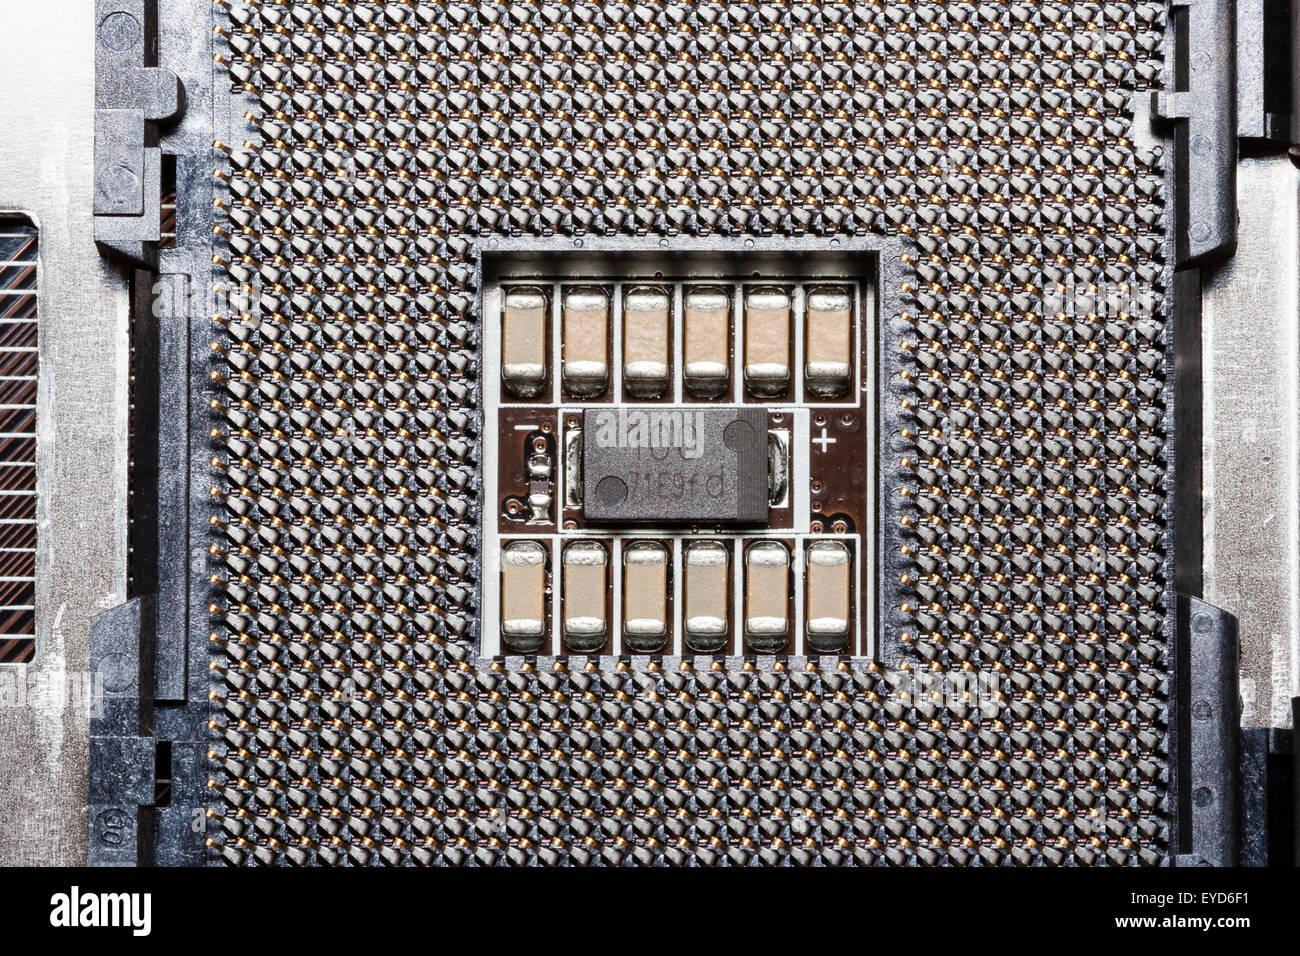 Intel Processor With Pins High Resolution Stock Photography and Images -  Alamy